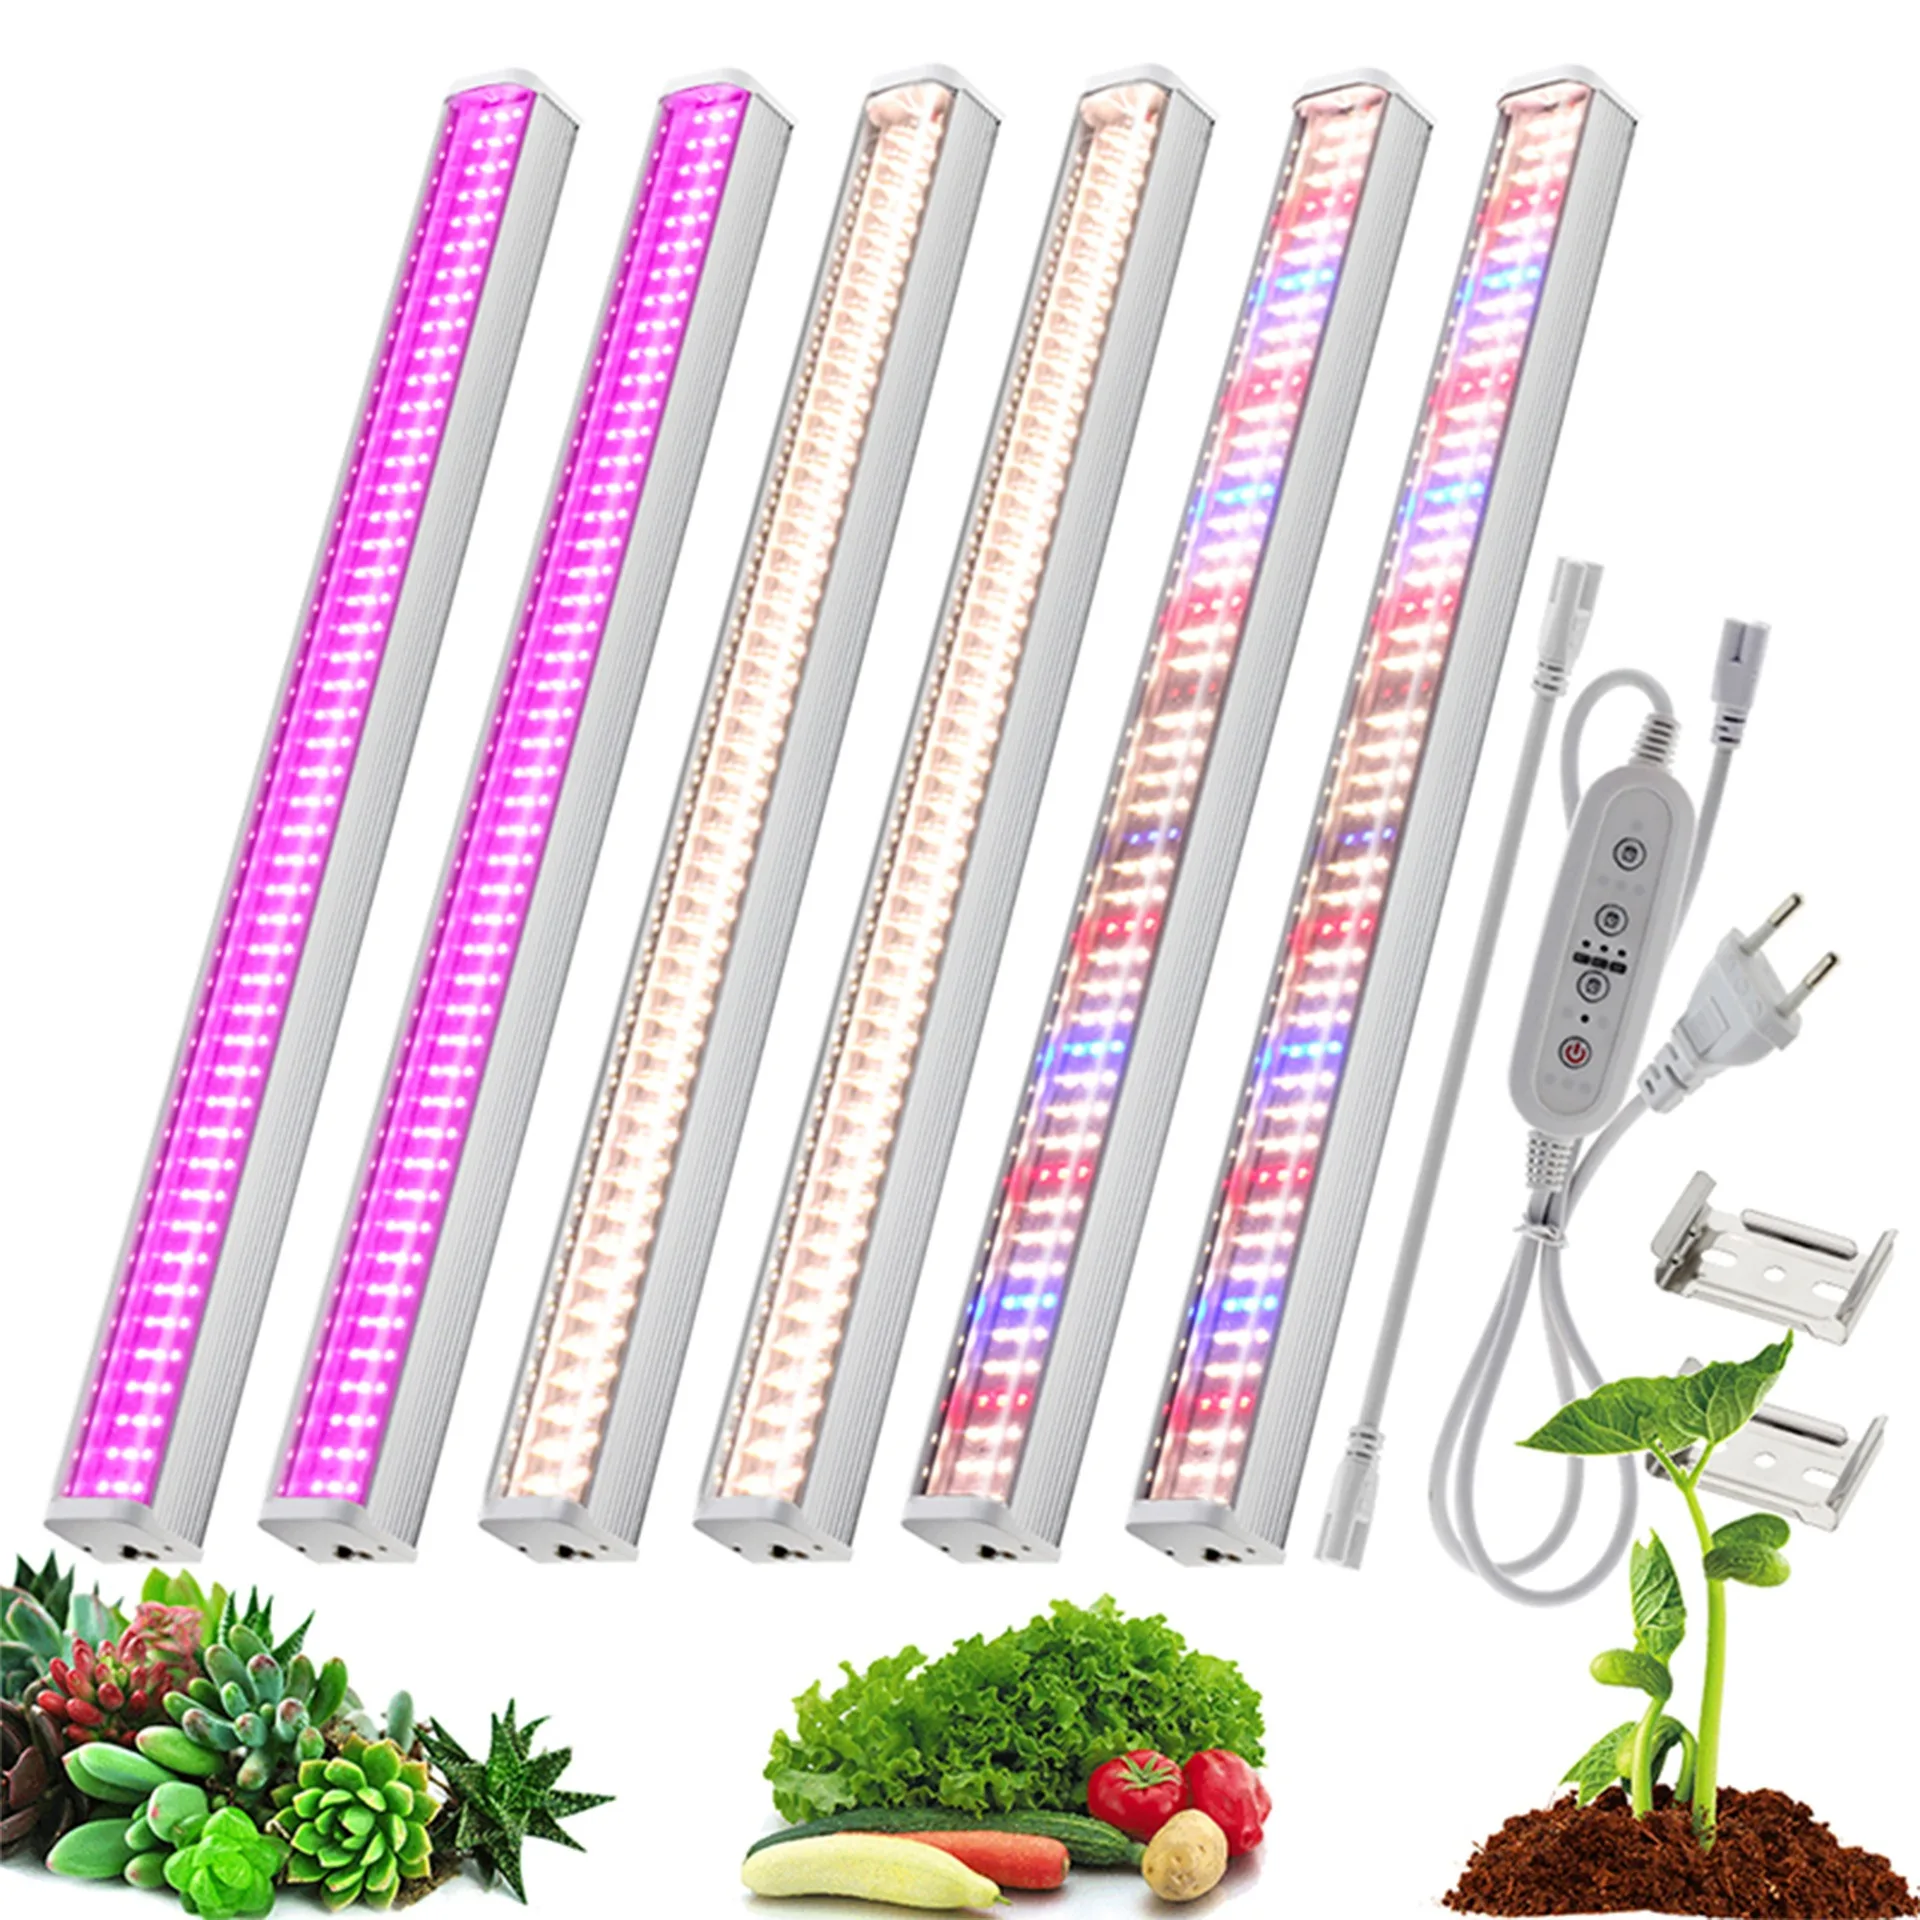 

T12 Daylight Tube LED Plant Growth Lamp Full Spectrum Hydroponic Vegetable Fill Light Greenhouse Soilless 25W Cultivation Lamp